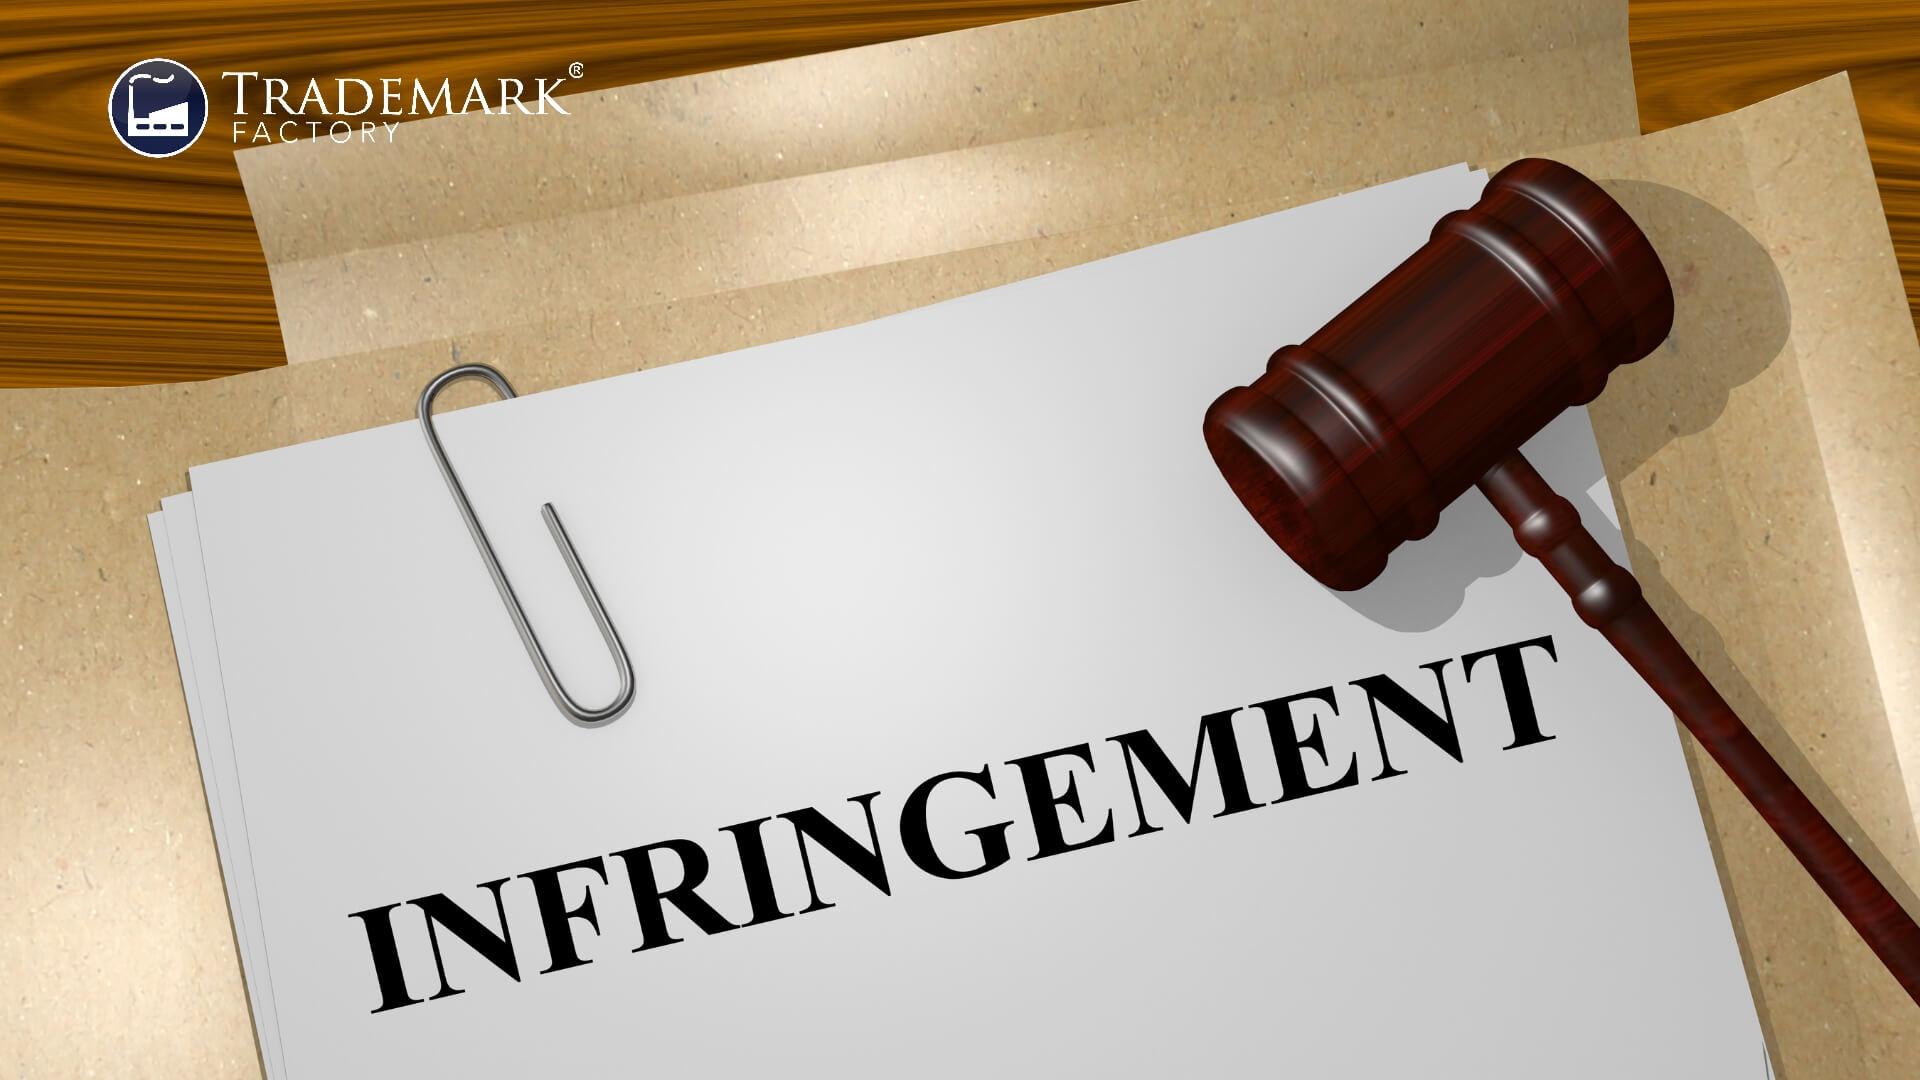 Trademark Infringement Definition and Types